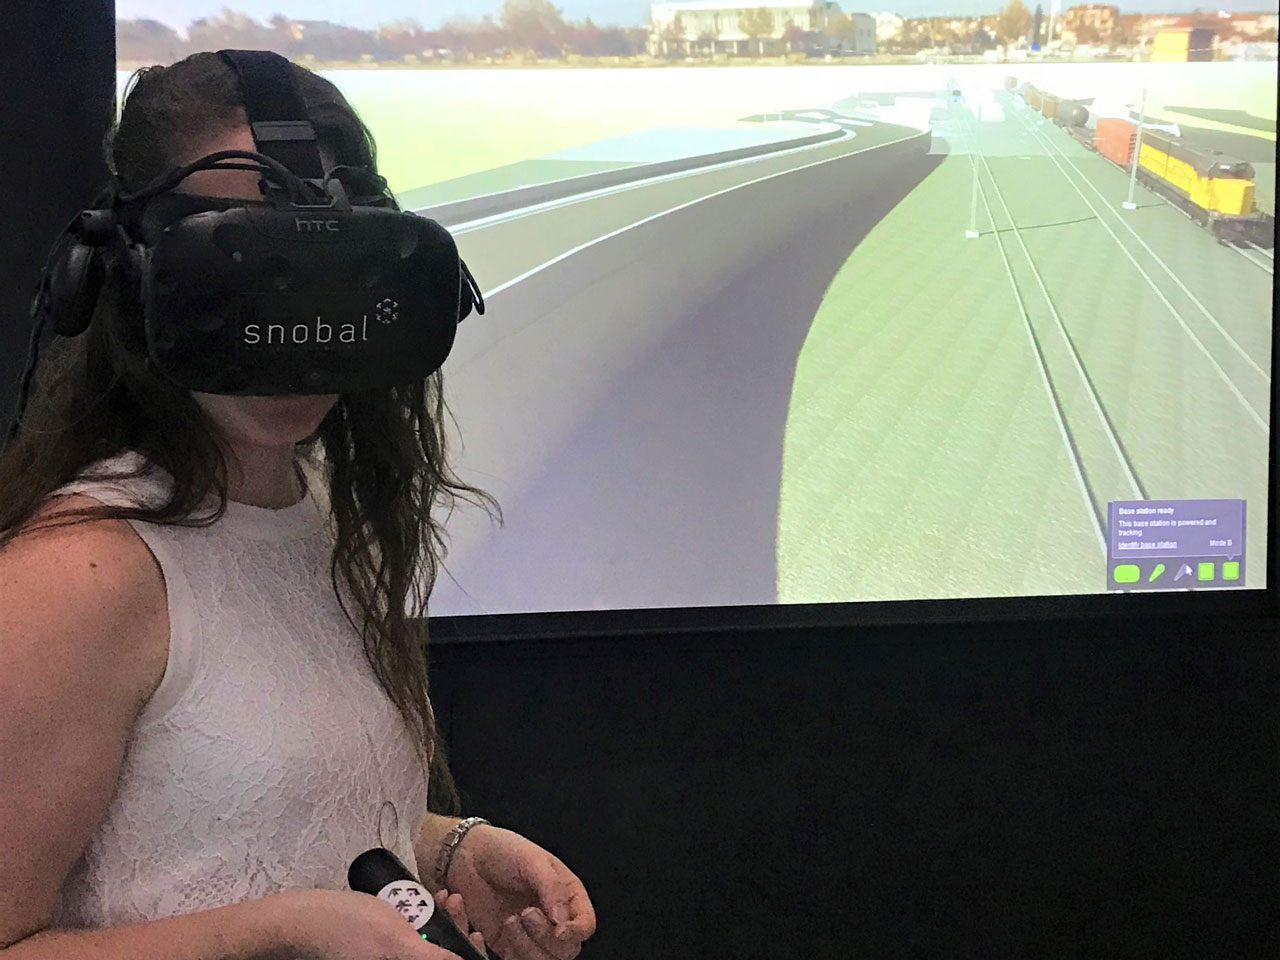 A girl holding a virtual reality tool with VR headset on.